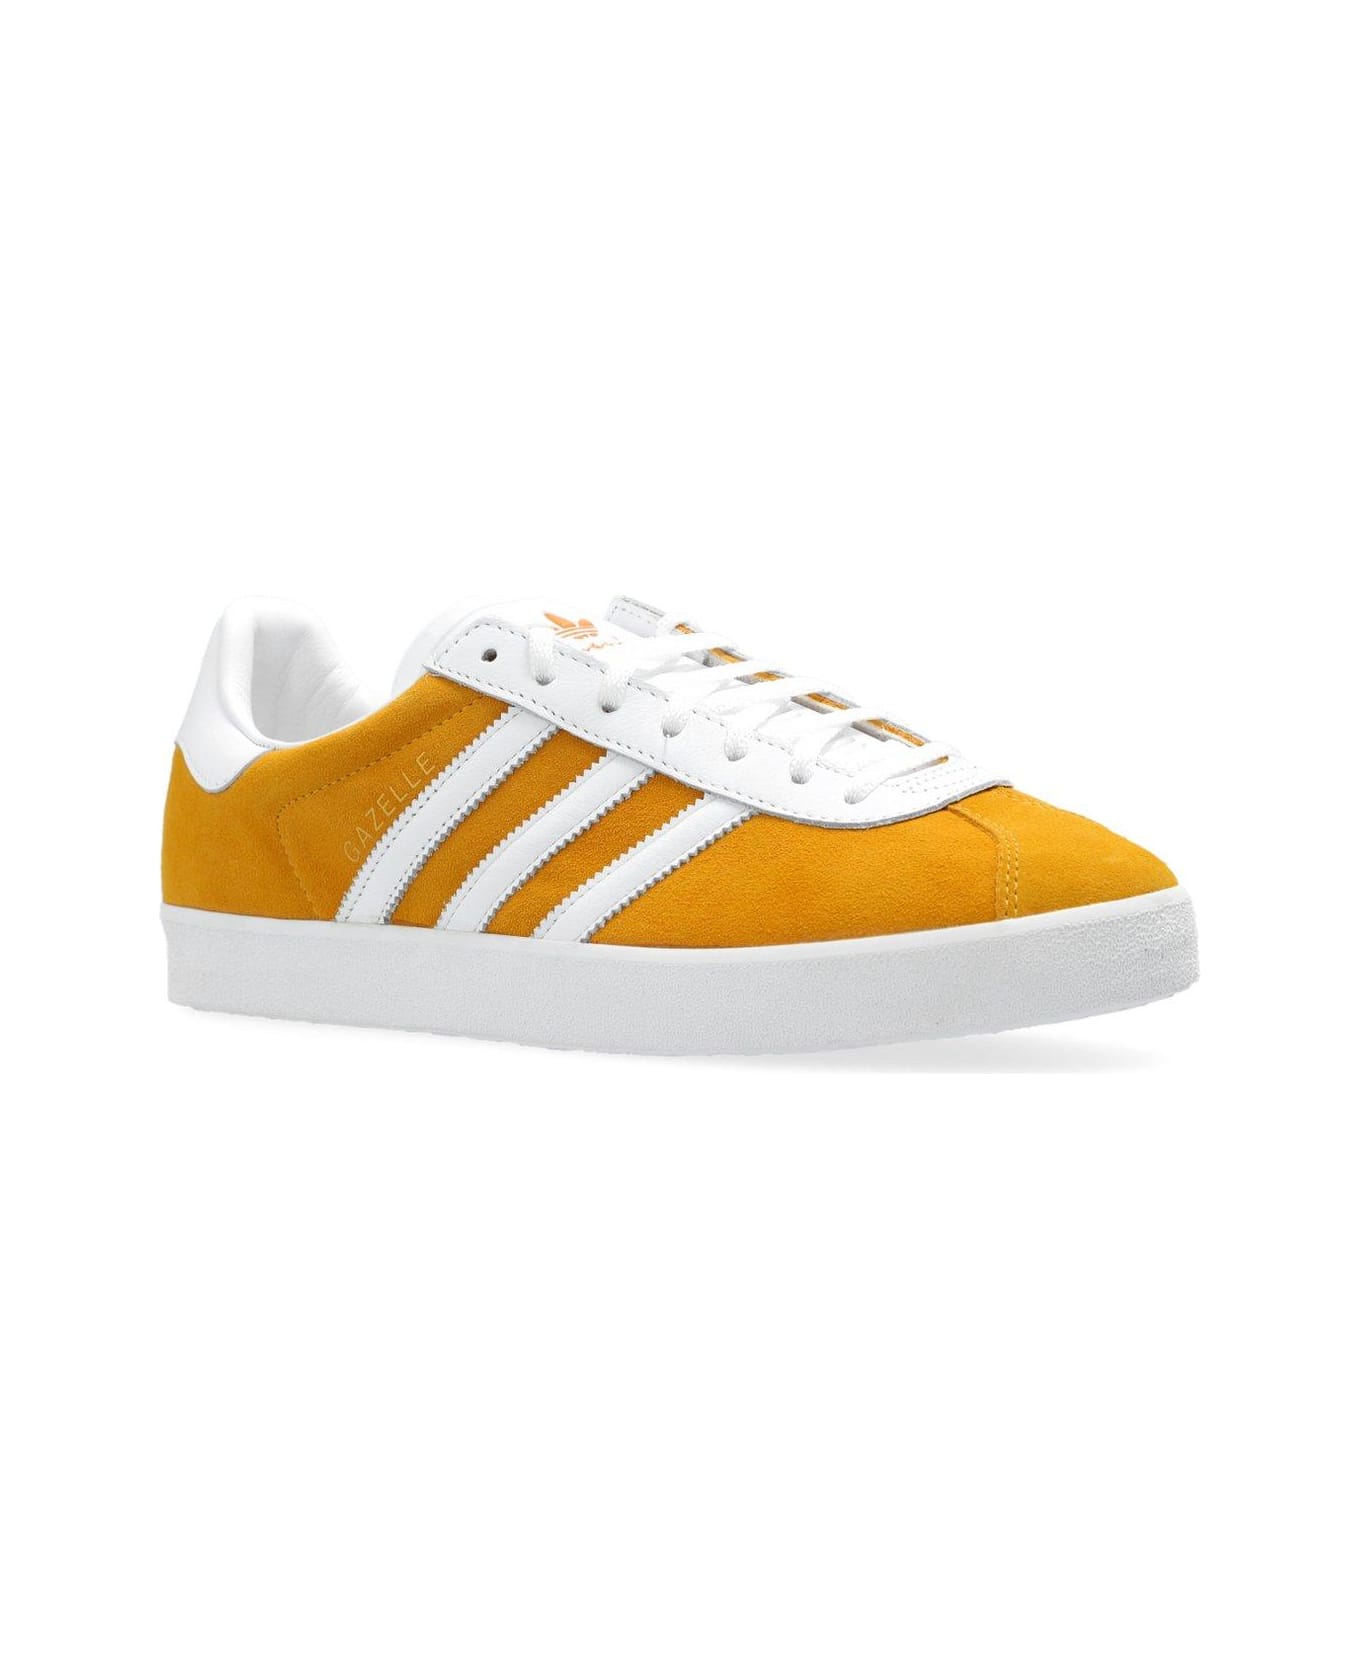 Adidas Gazelle 85 Lace-up Sneakers - Yellow スニーカー